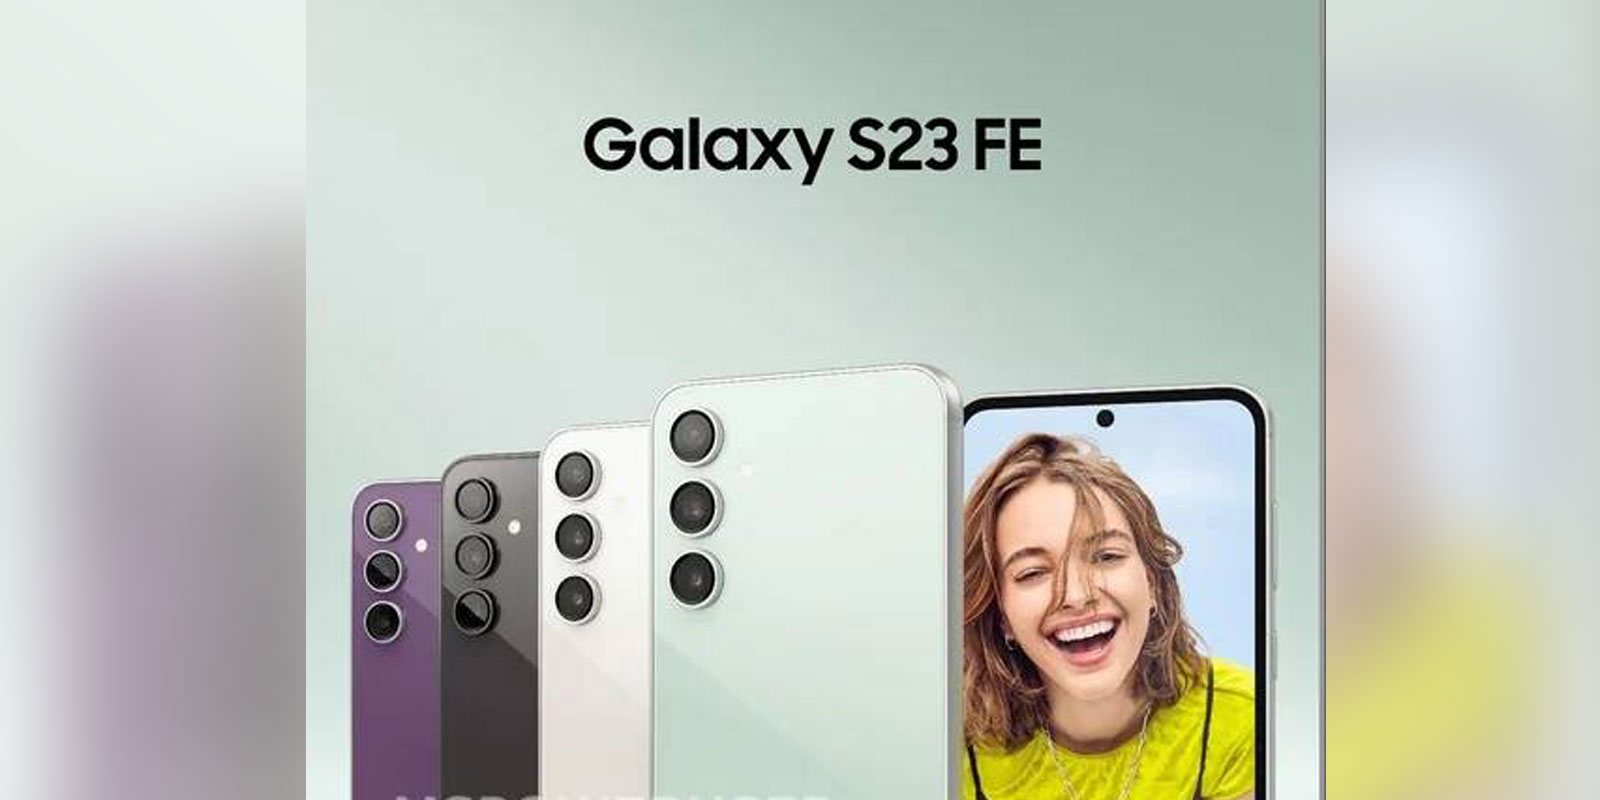 Specifications for the new Galaxy S23 FE